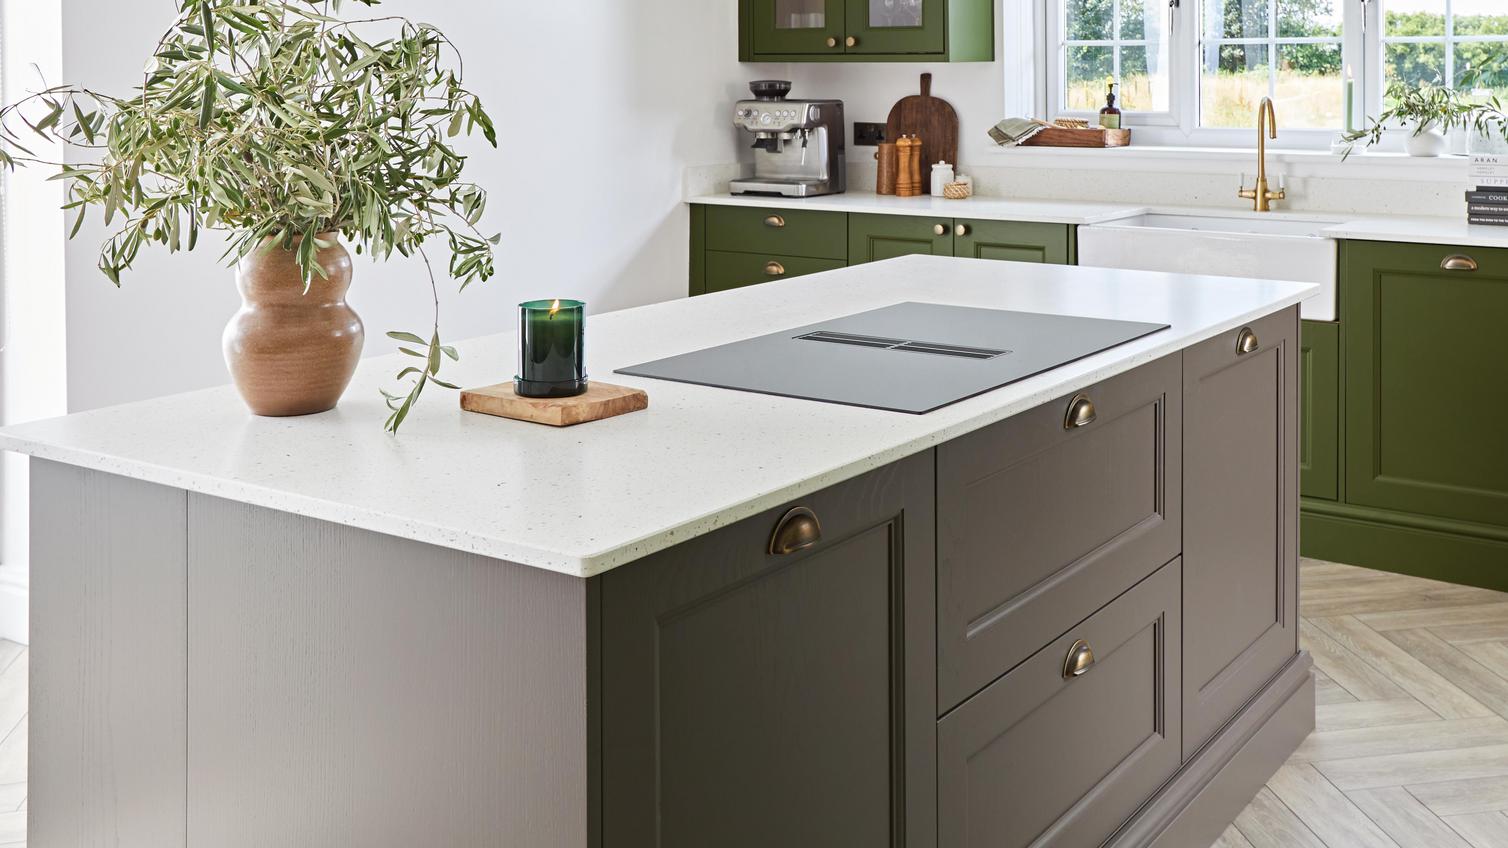 A green kitchen with a brown shaker kitchen island. It has a built-in hob, white worktop, and brass cup handles.